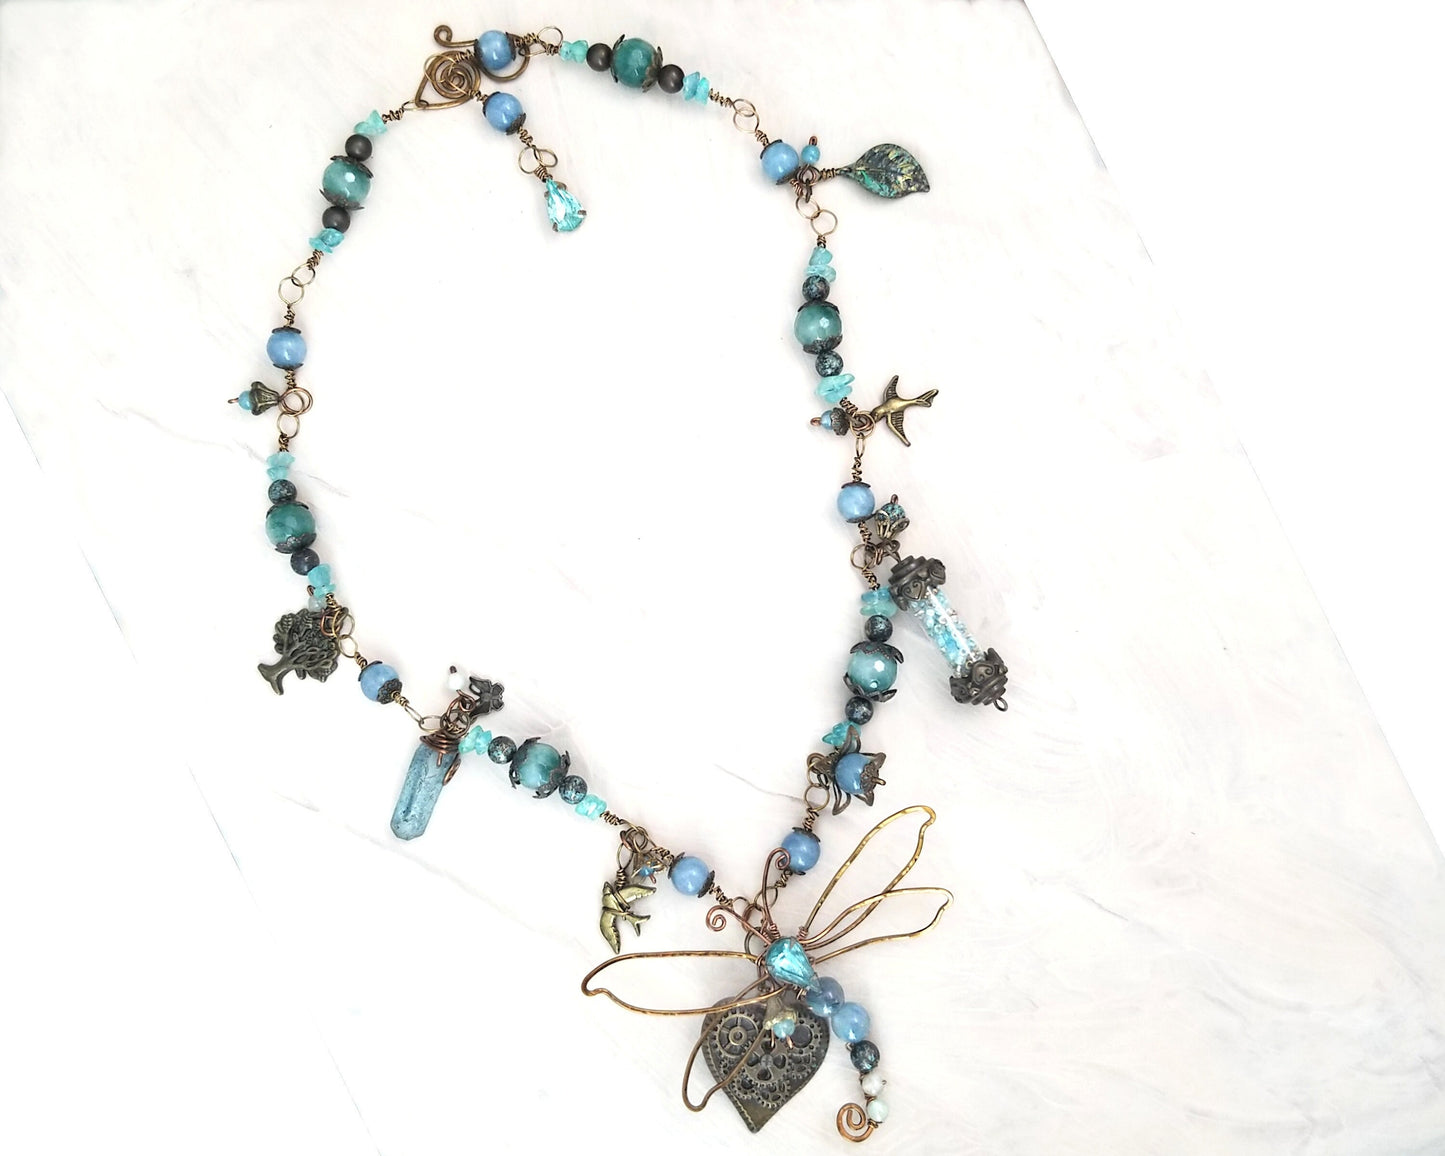 Fairytale Forest Dragonfly Necklace in Teal Renaissance Adjustable Length Fantasy Woodland #1346